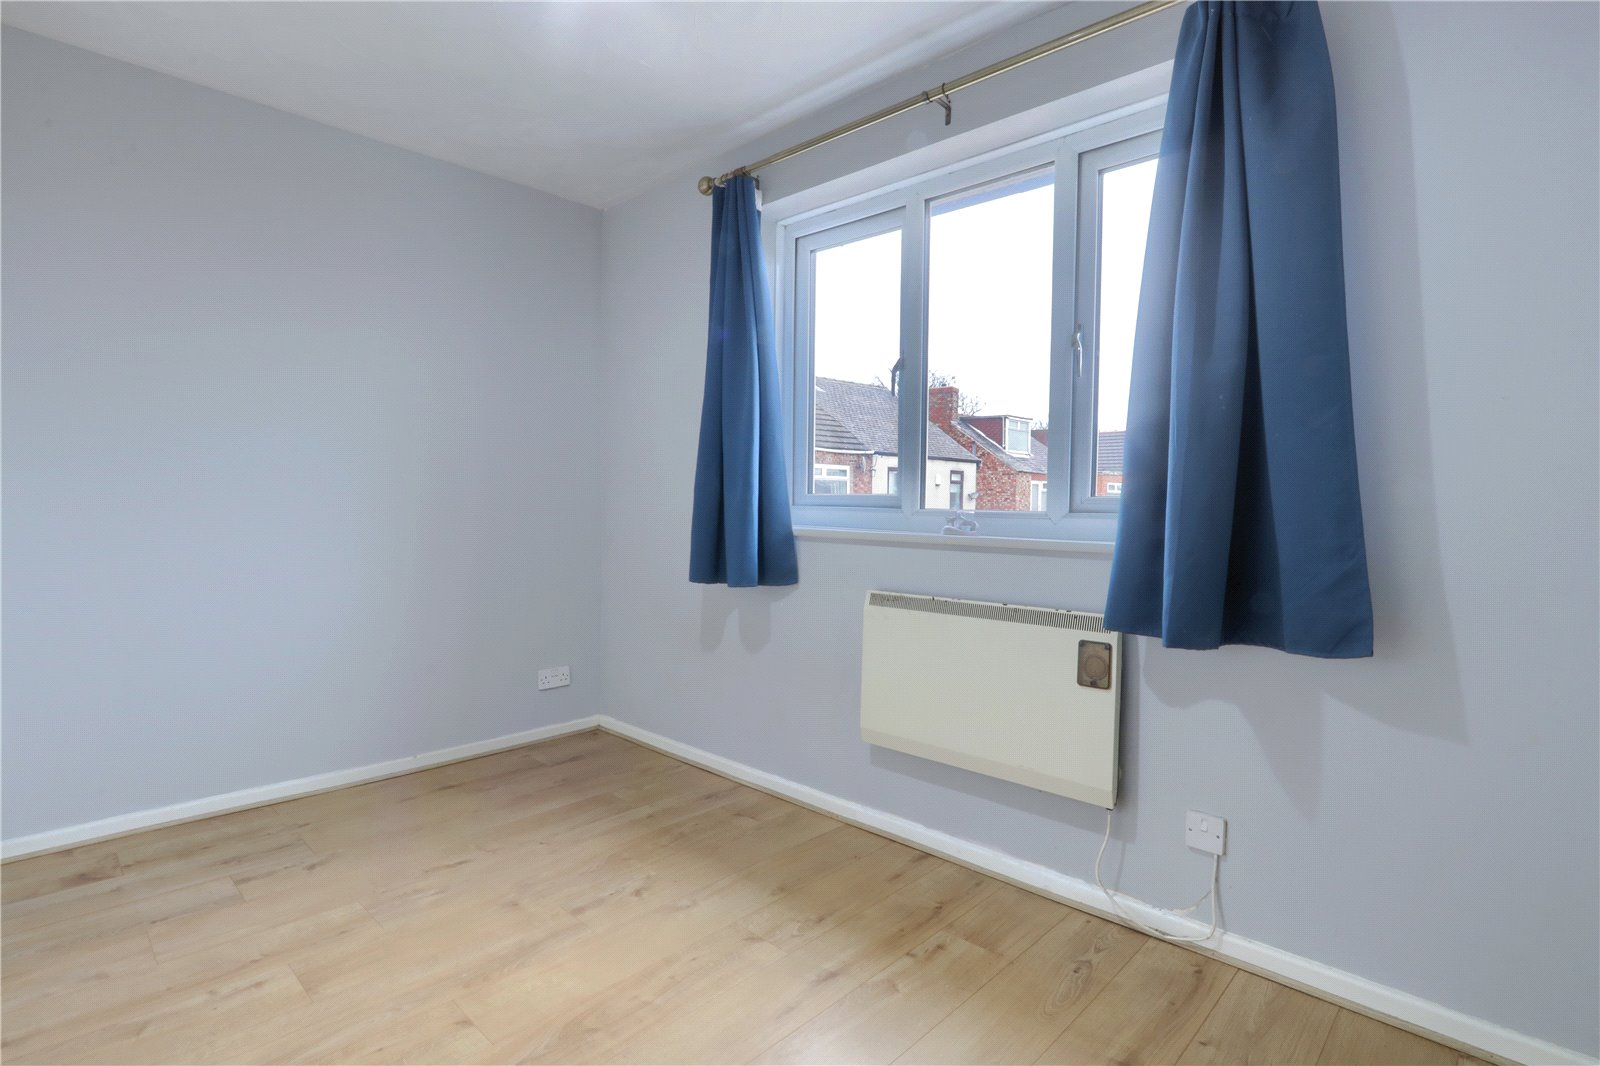 2 bed house for sale in Redcar Lane, Redcar  - Property Image 10